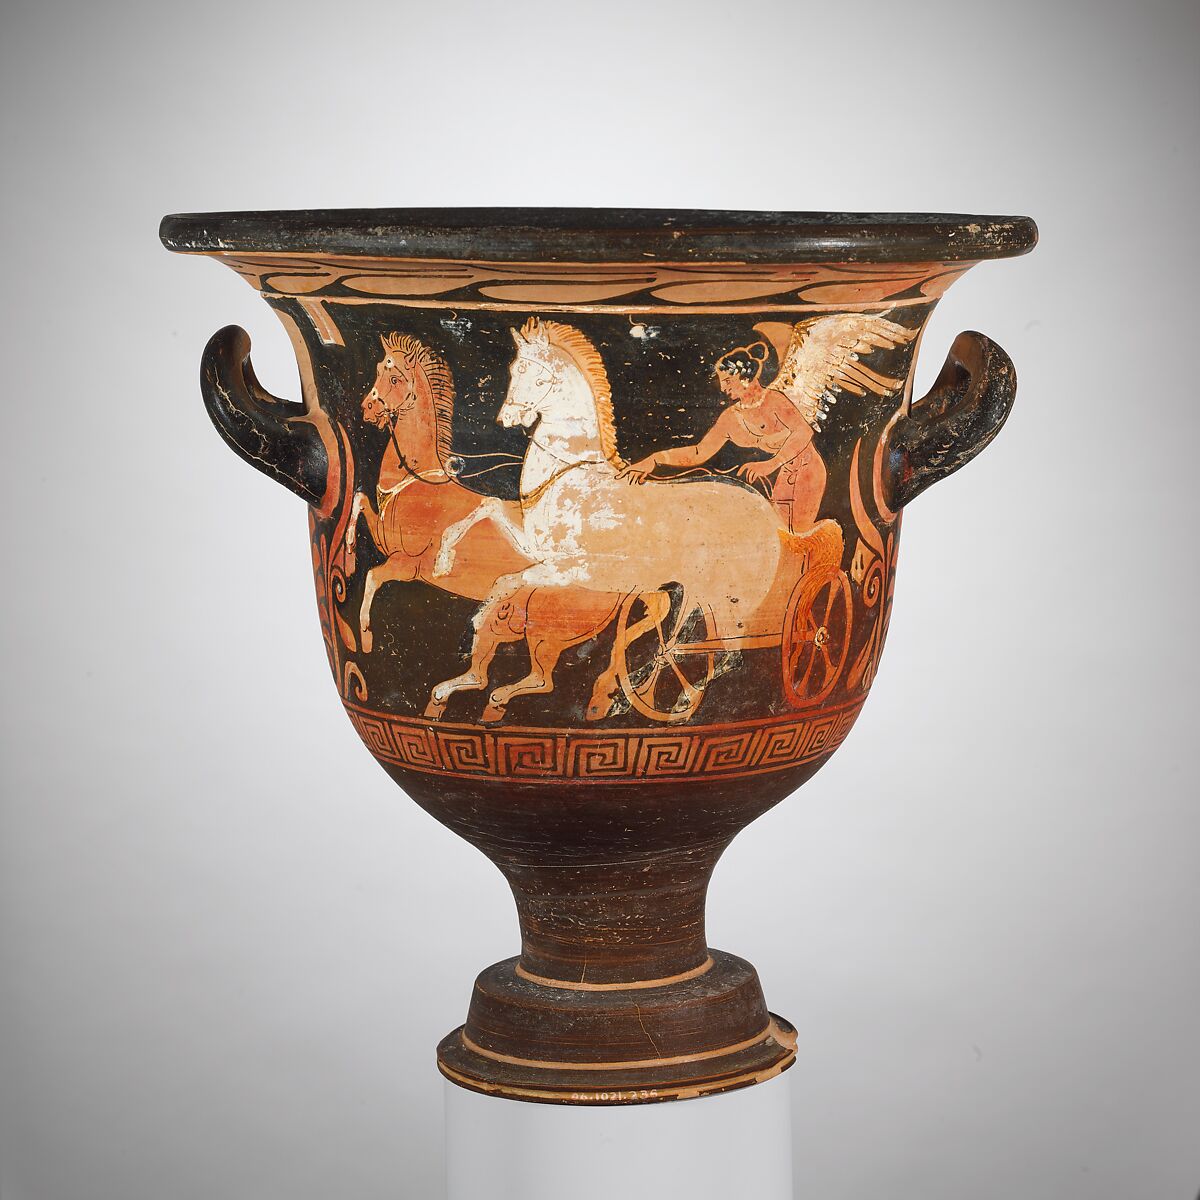 Terracotta bell-krater (mixing bowl), Attributed to the Whiteface Painter, Terracotta, Greek, South Italian, Campanian 